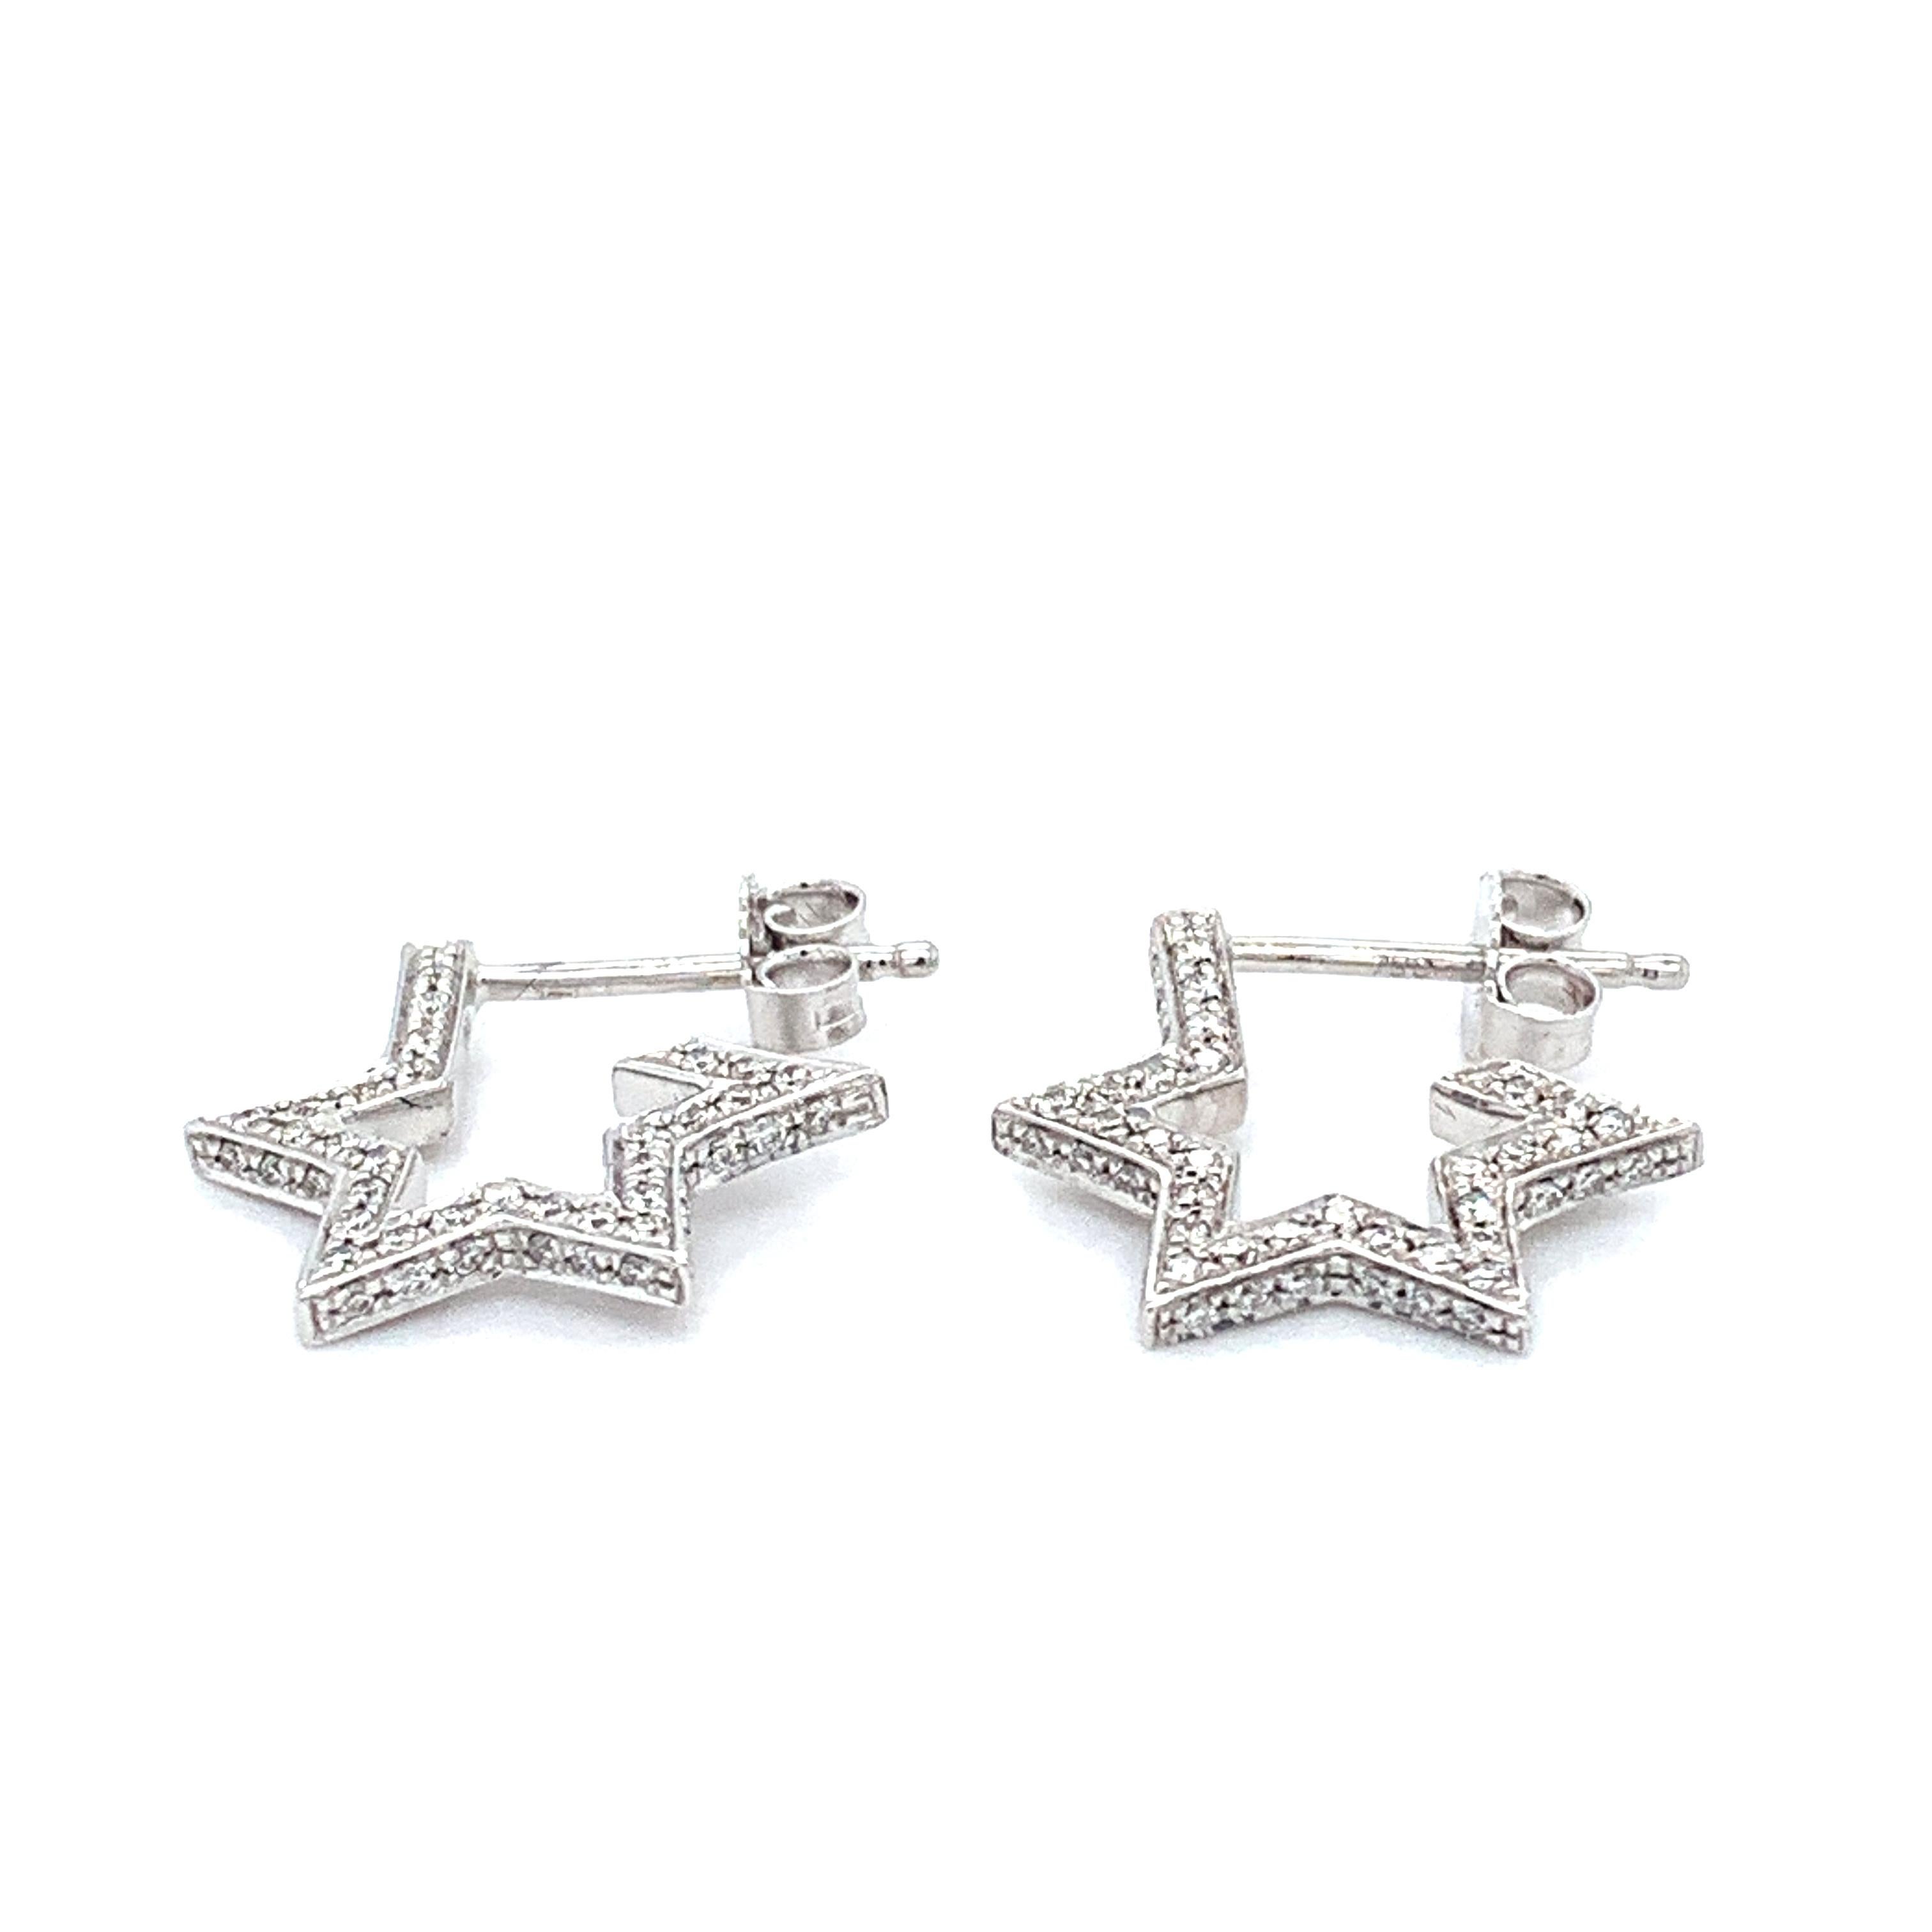 Diamond pave star art deco stud earrings 18k white gold In New Condition For Sale In London, GB